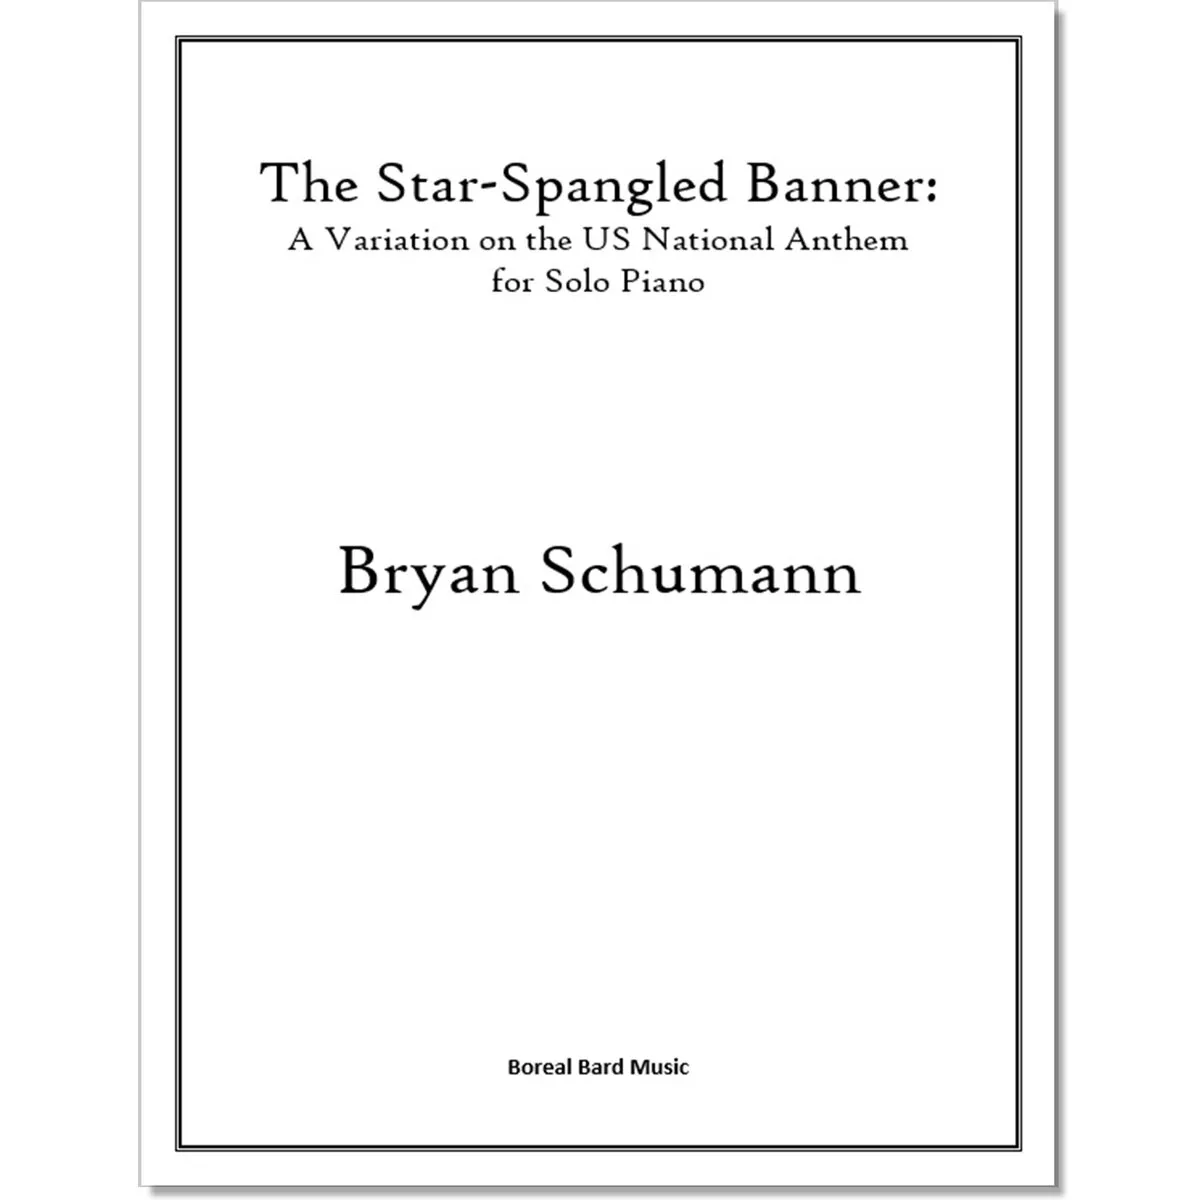 The Star-Spangled Banner: A Variation on the US National Anthem for Solo Piano (sheet music)